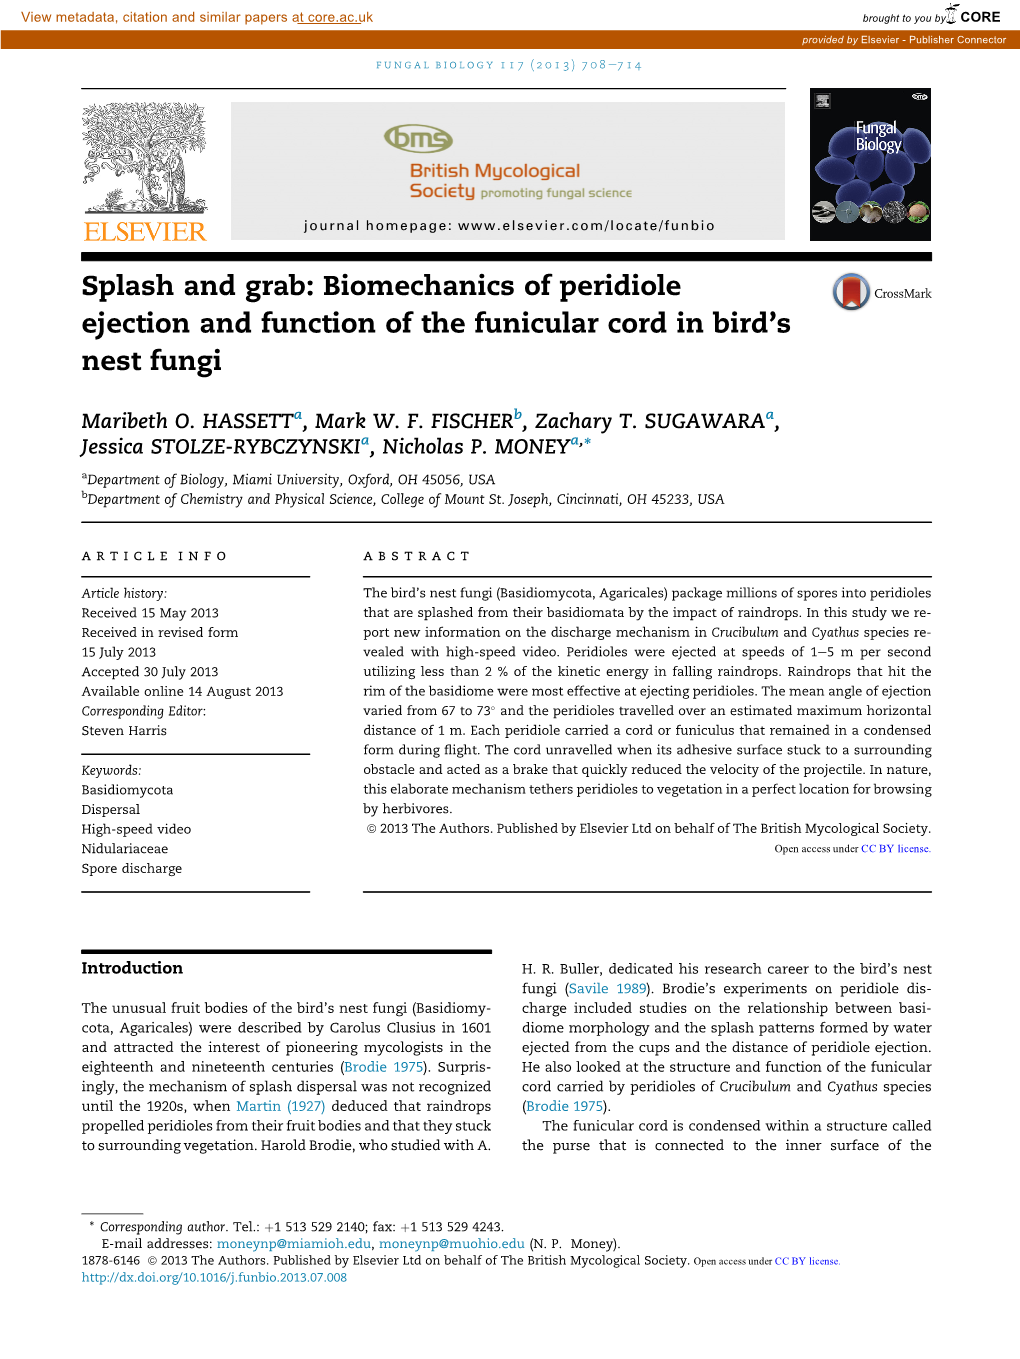 Biomechanics of Peridiole Ejection and Function of the Funicular Cord in Bird's Nest Fungi